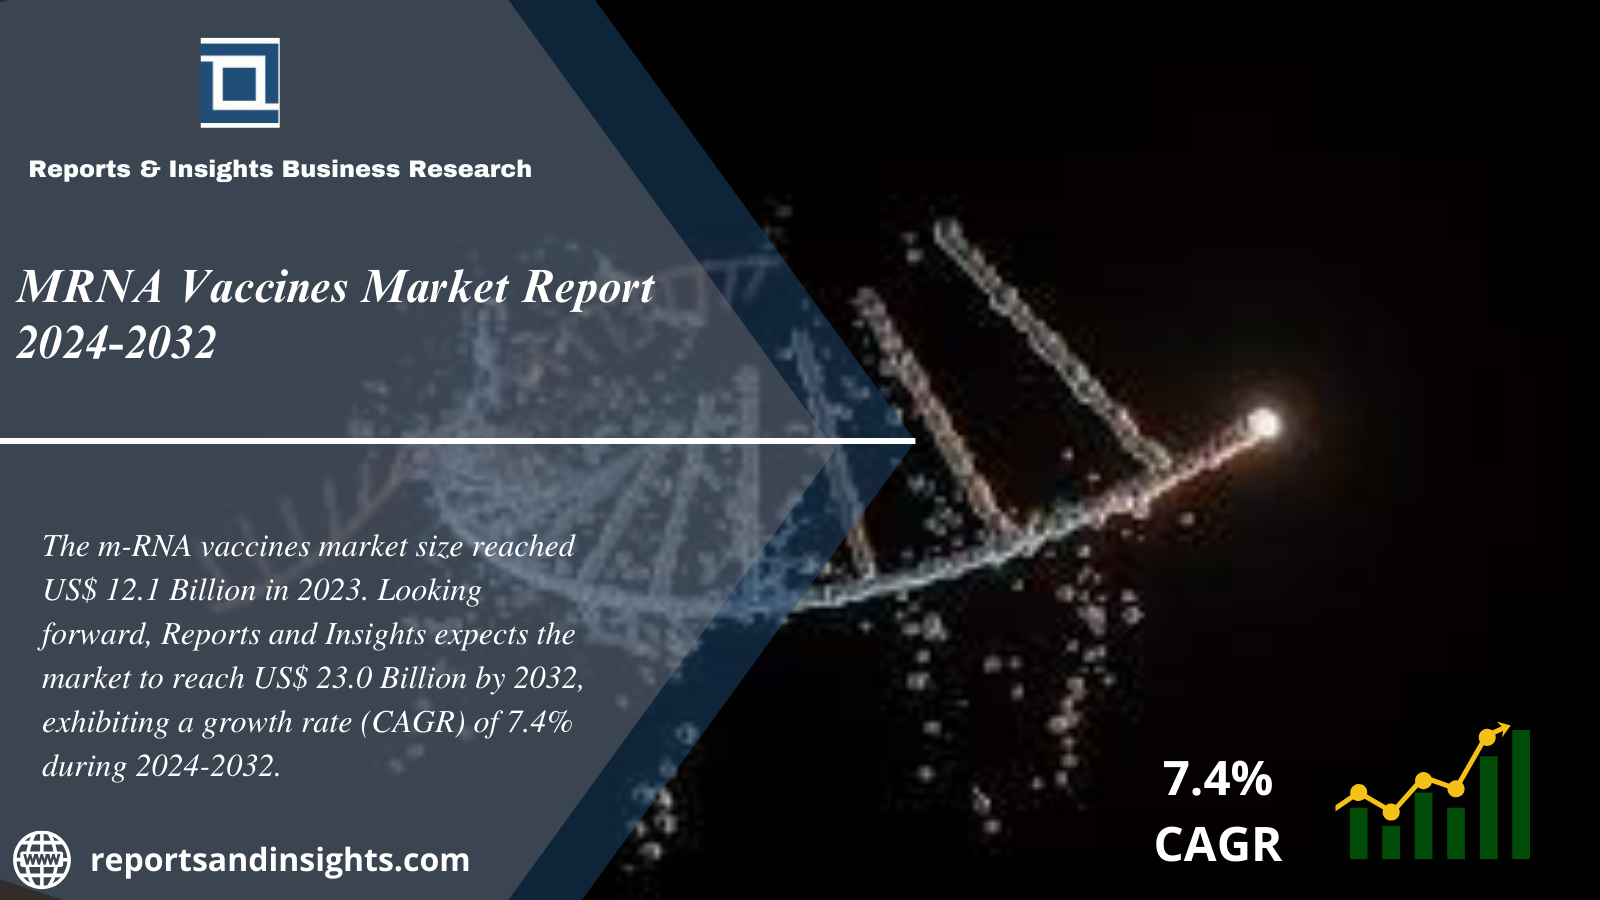 MRNA Vaccines Market 2024 to 2032: Global Industry Report, Share, Trends and Forecast